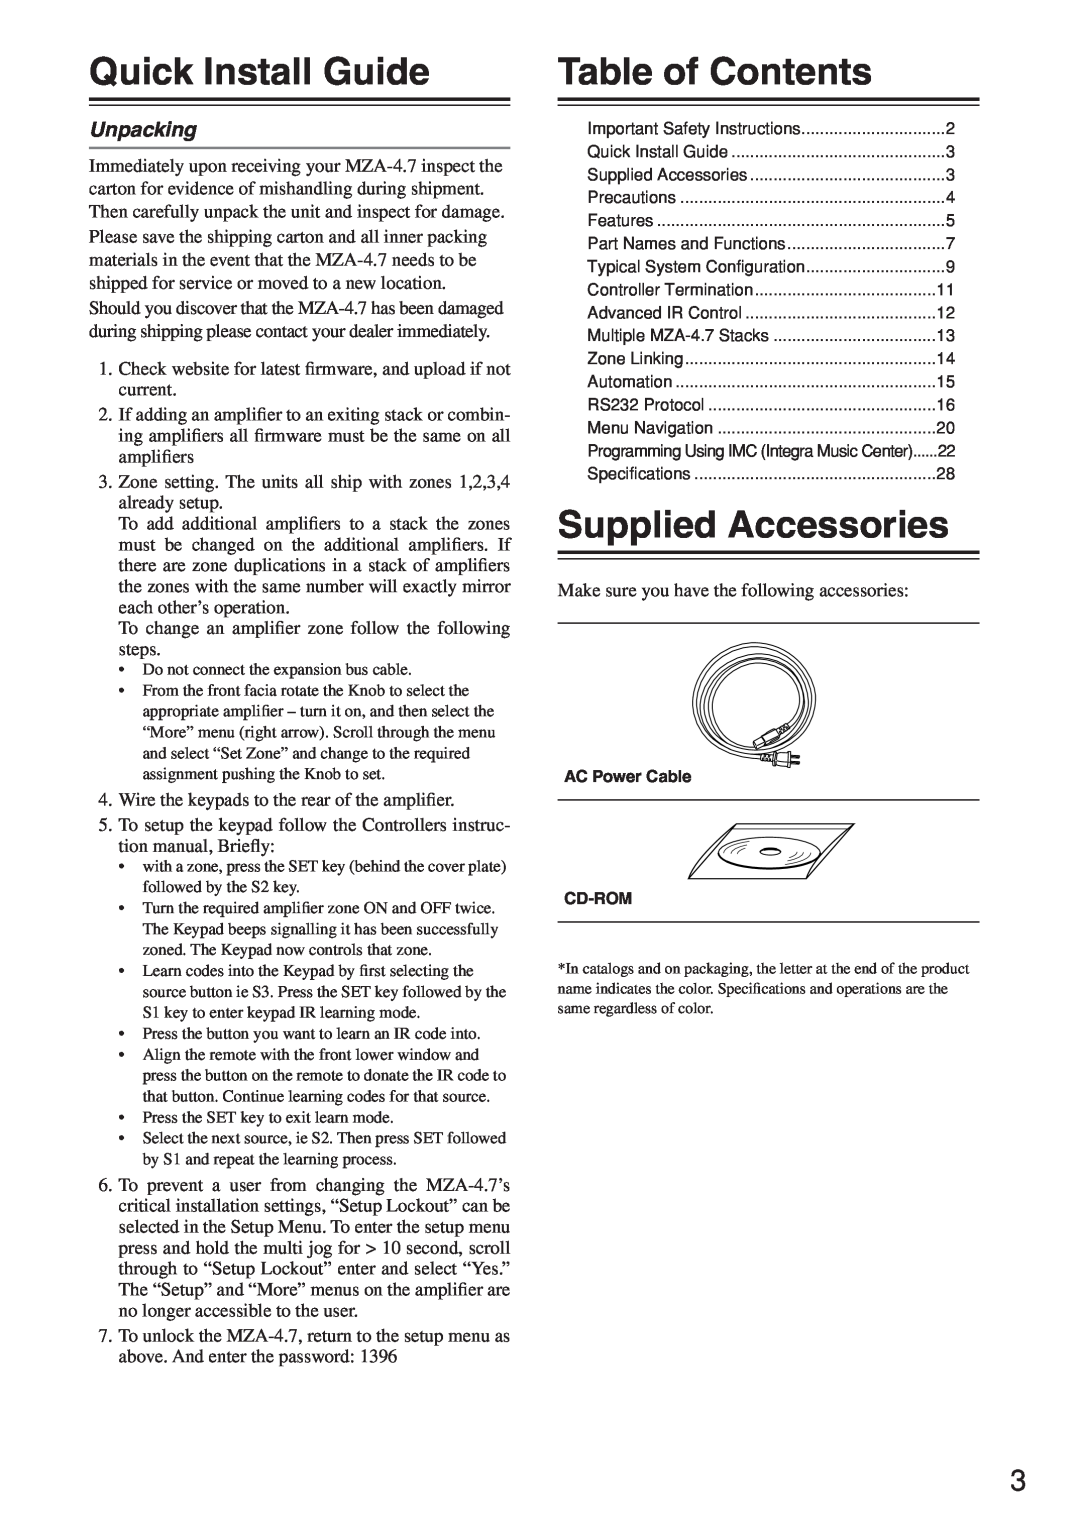 Integra MZA-4.7 instruction manual Quick Install Guide, Table of Contents, Supplied Accessories, Unpacking 